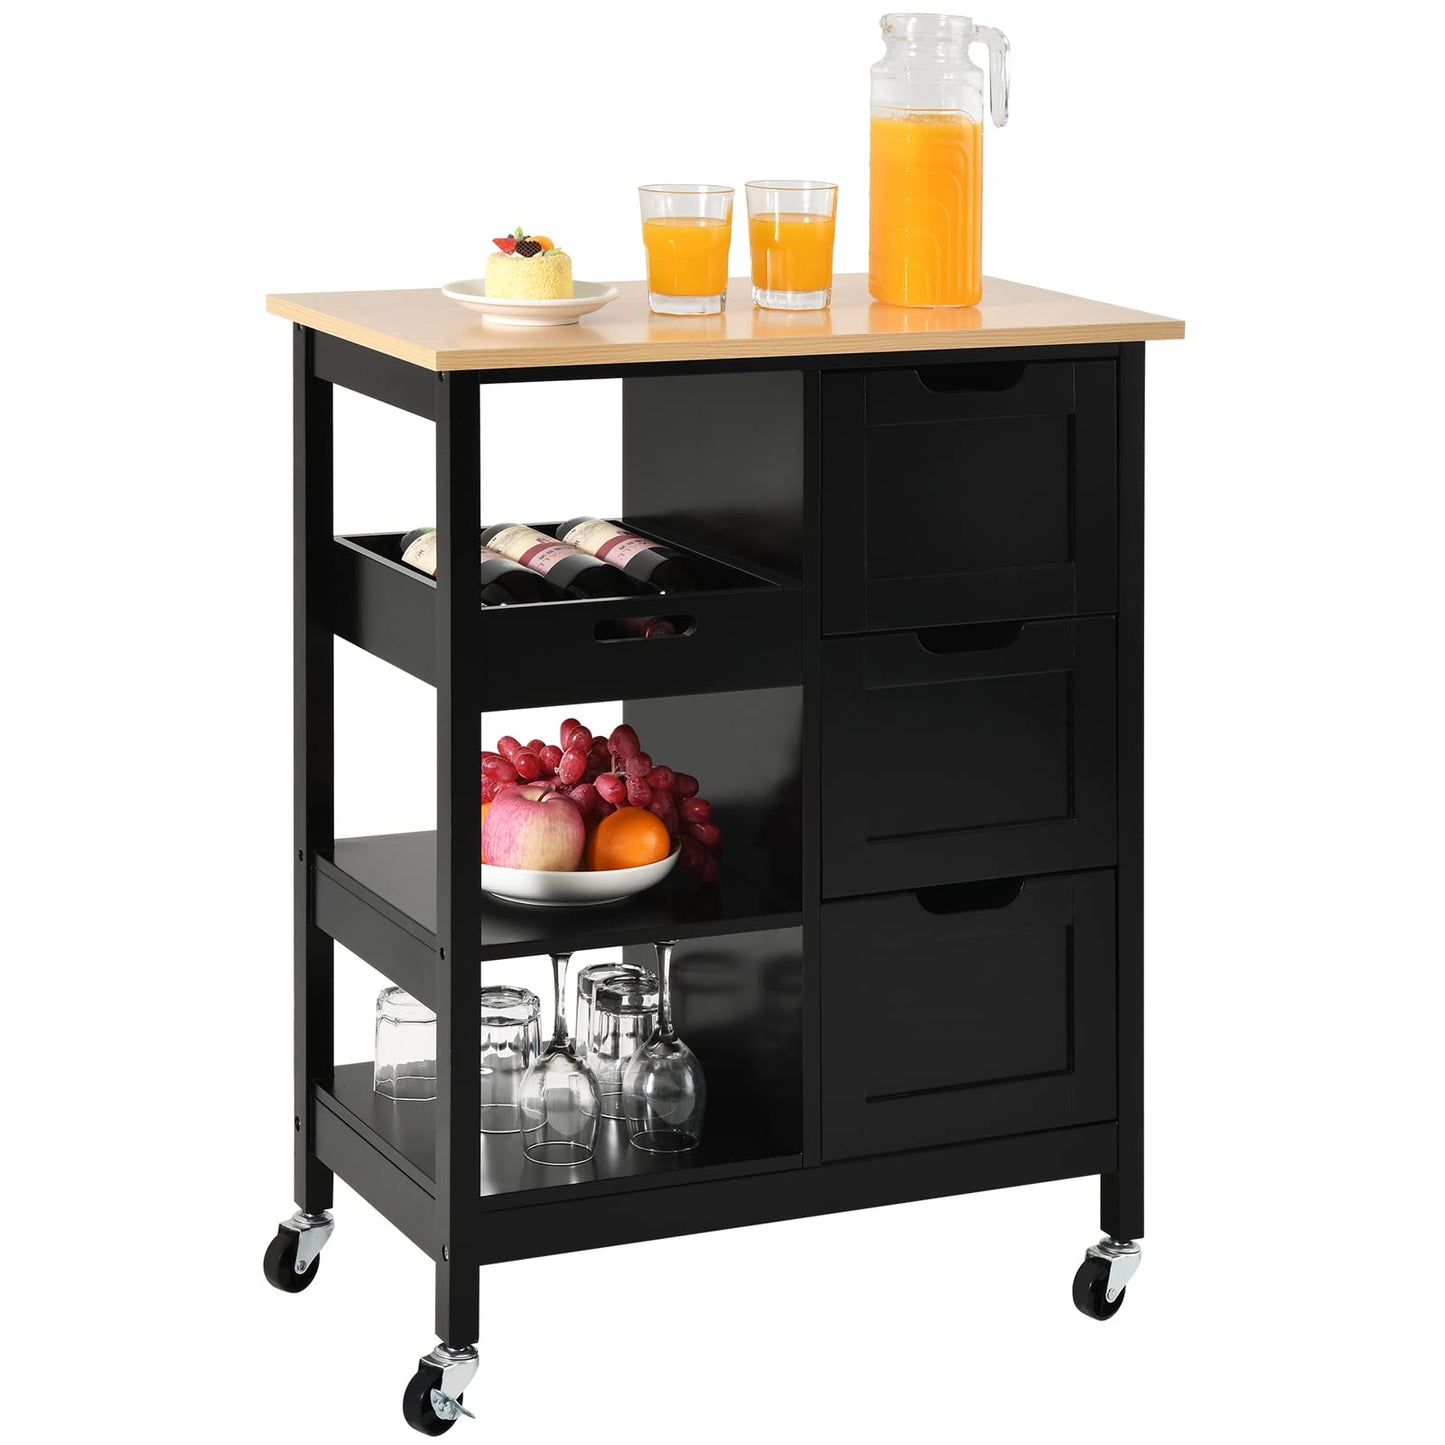 YITAHOME Kitchen Island with Storage, Kitchen Cart for Home, Rolling Serving Utility Trolley Cart on Wheel with 3 Drawers and 3 Storage Shelves, Kitchen Serving Cart for Dining Room, Bar, Black